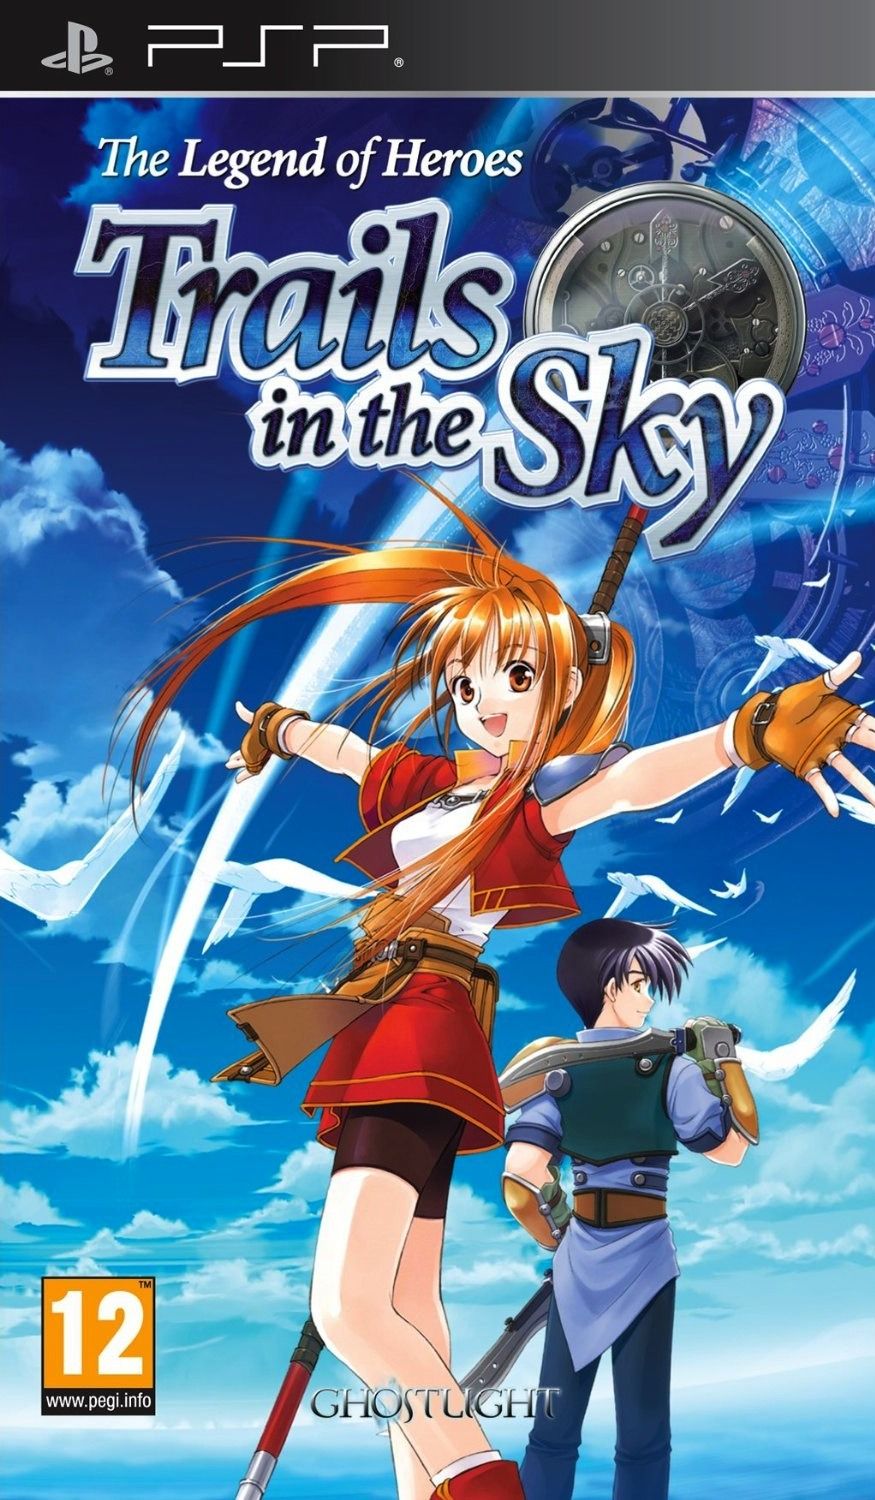 the-legend-of-heroes-trails-in-the-sky-2004-jeu-vid-o